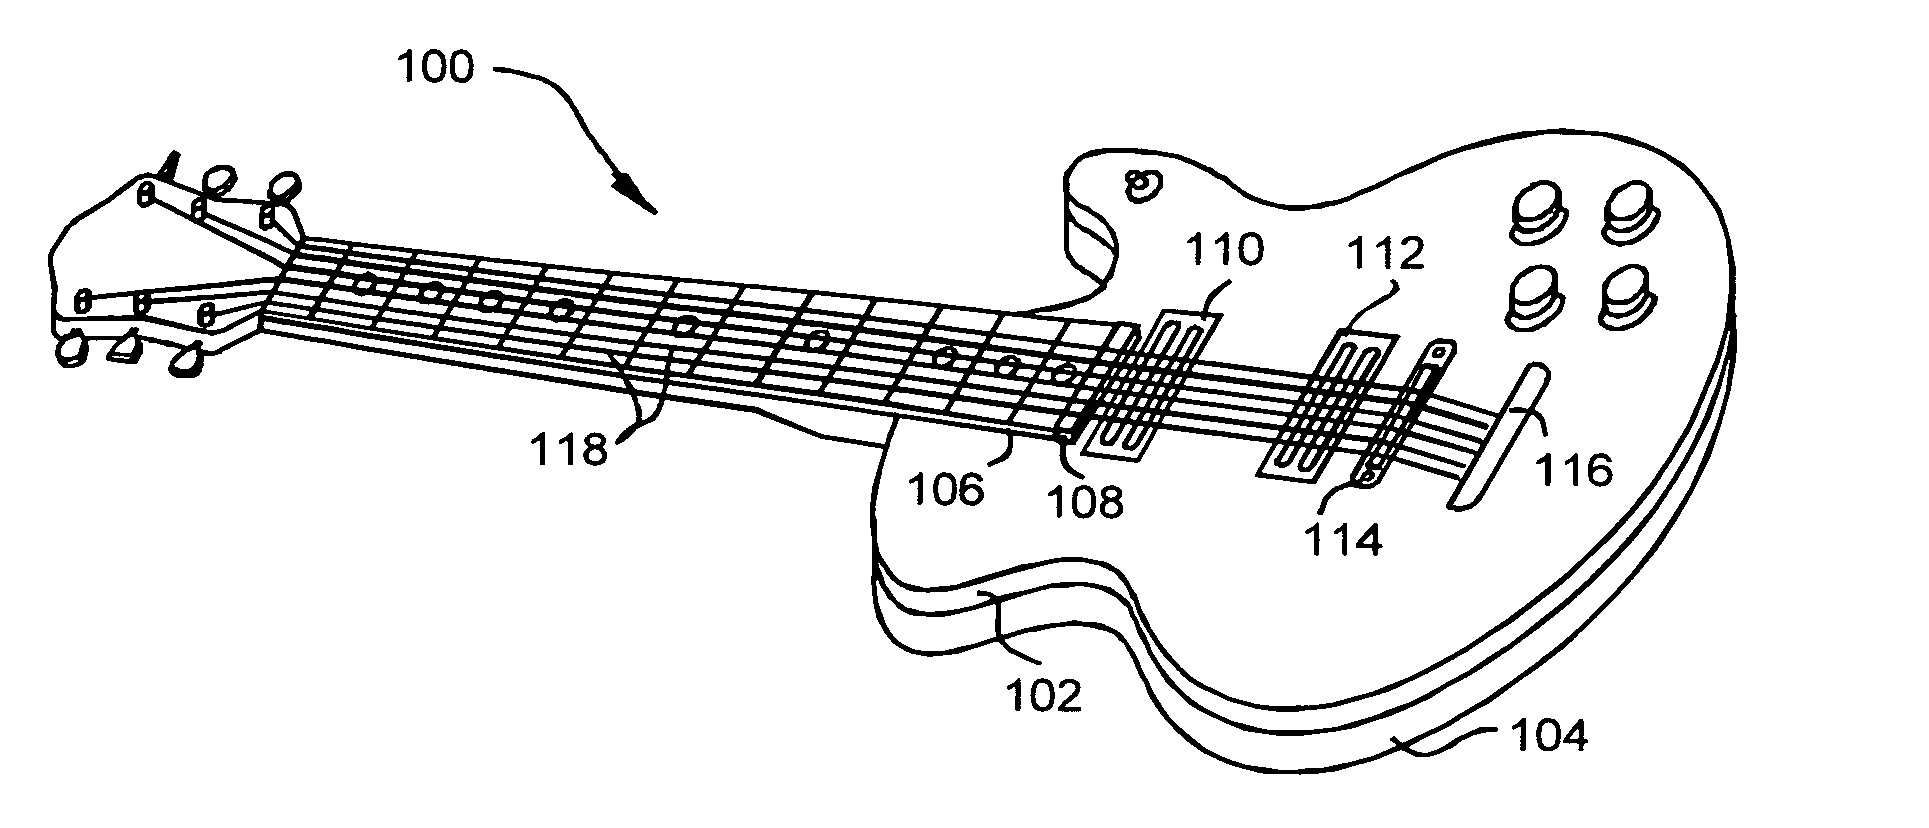 High density sound enhancing components for stringed musical instruments